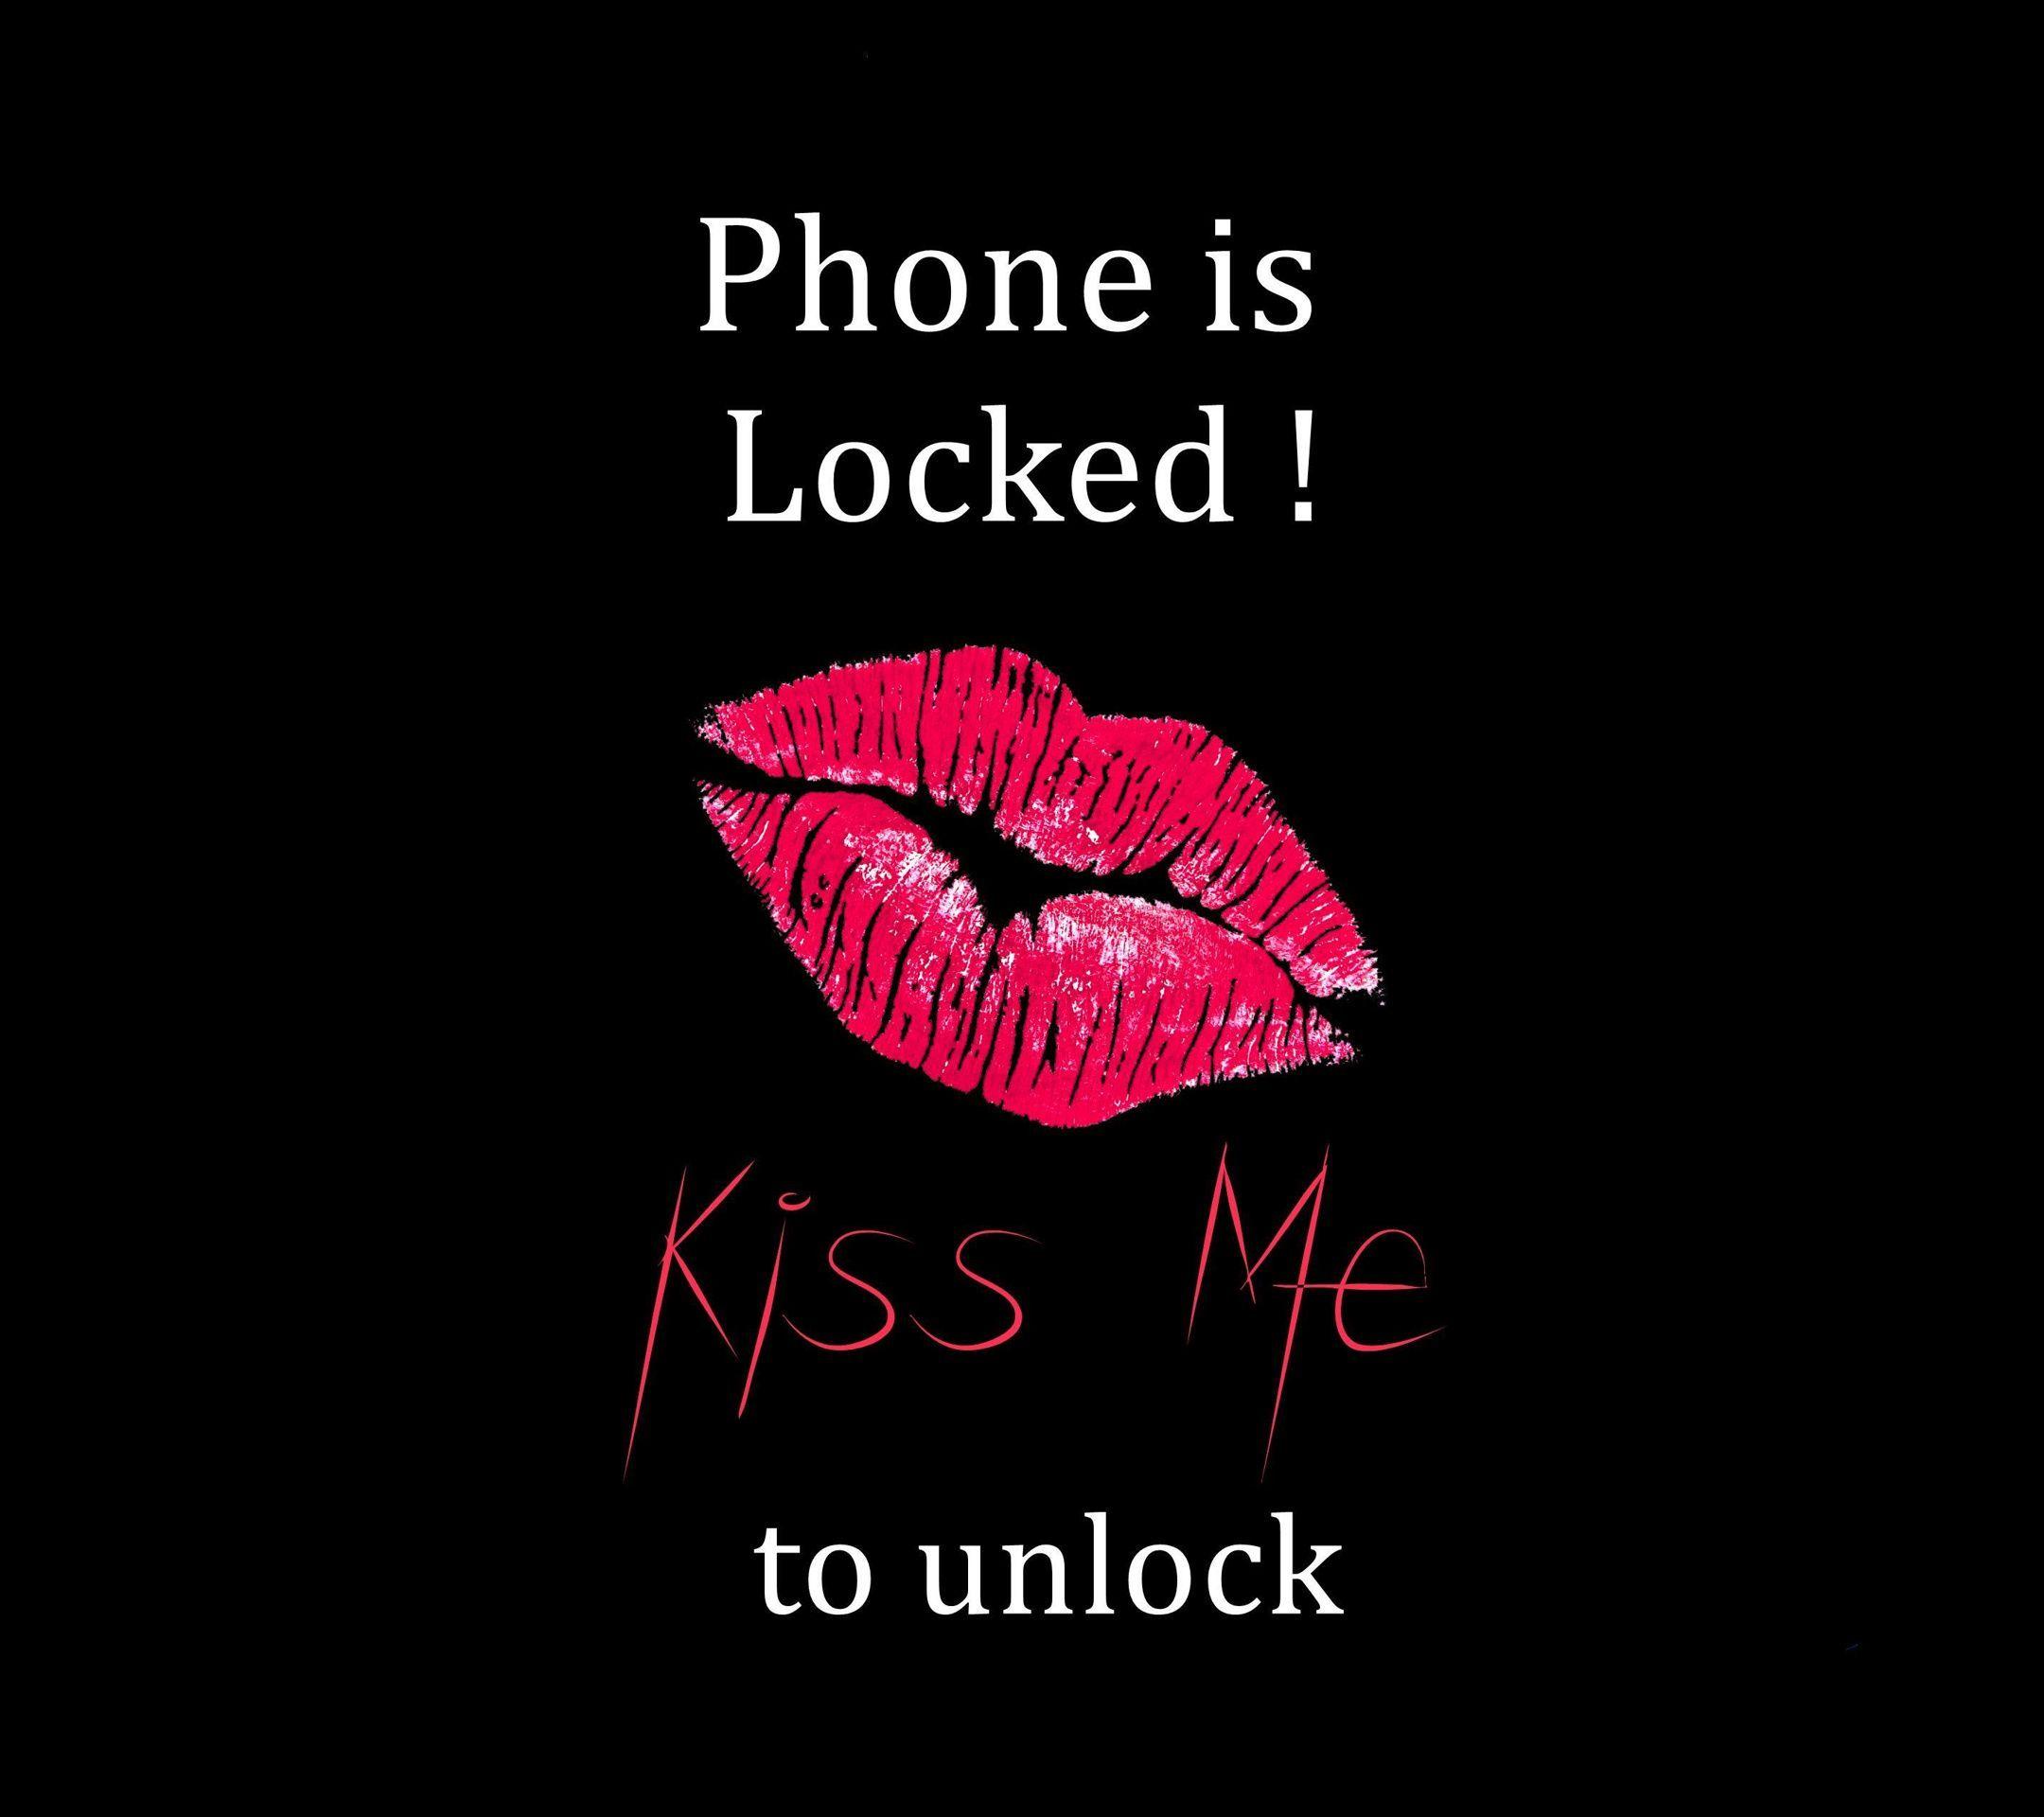 Funny Locked Phone Wallpapers Top Free Funny Locked Phone